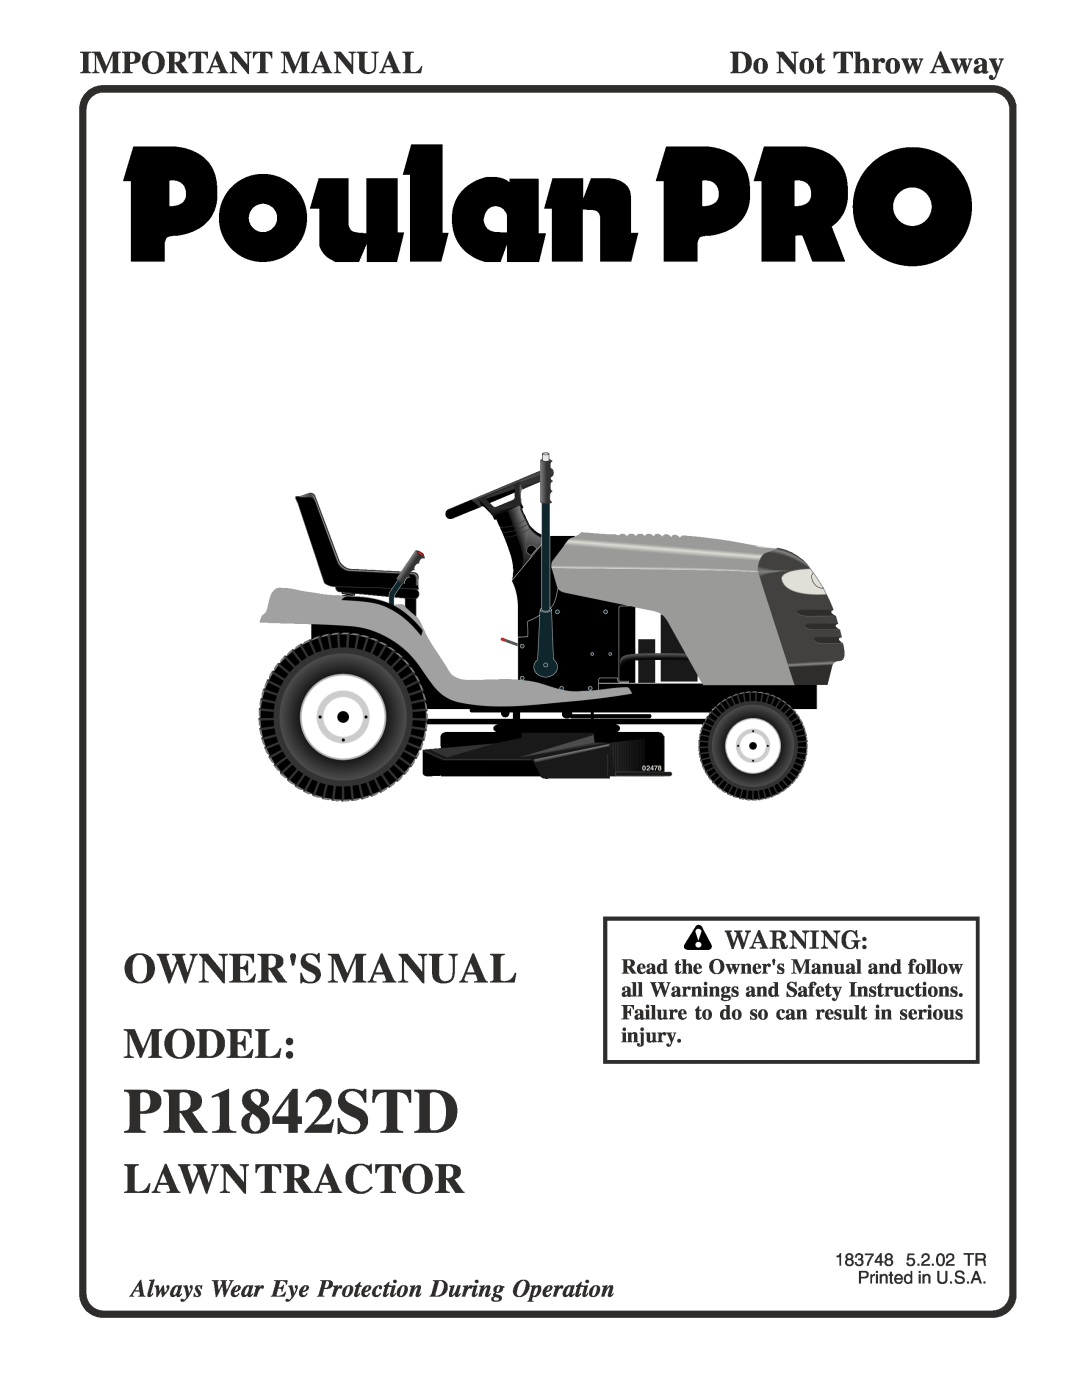 Poulan 183748 owner manual Lawntractor, PR1842STD, Important Manual, Do Not Throw Away, 02478 